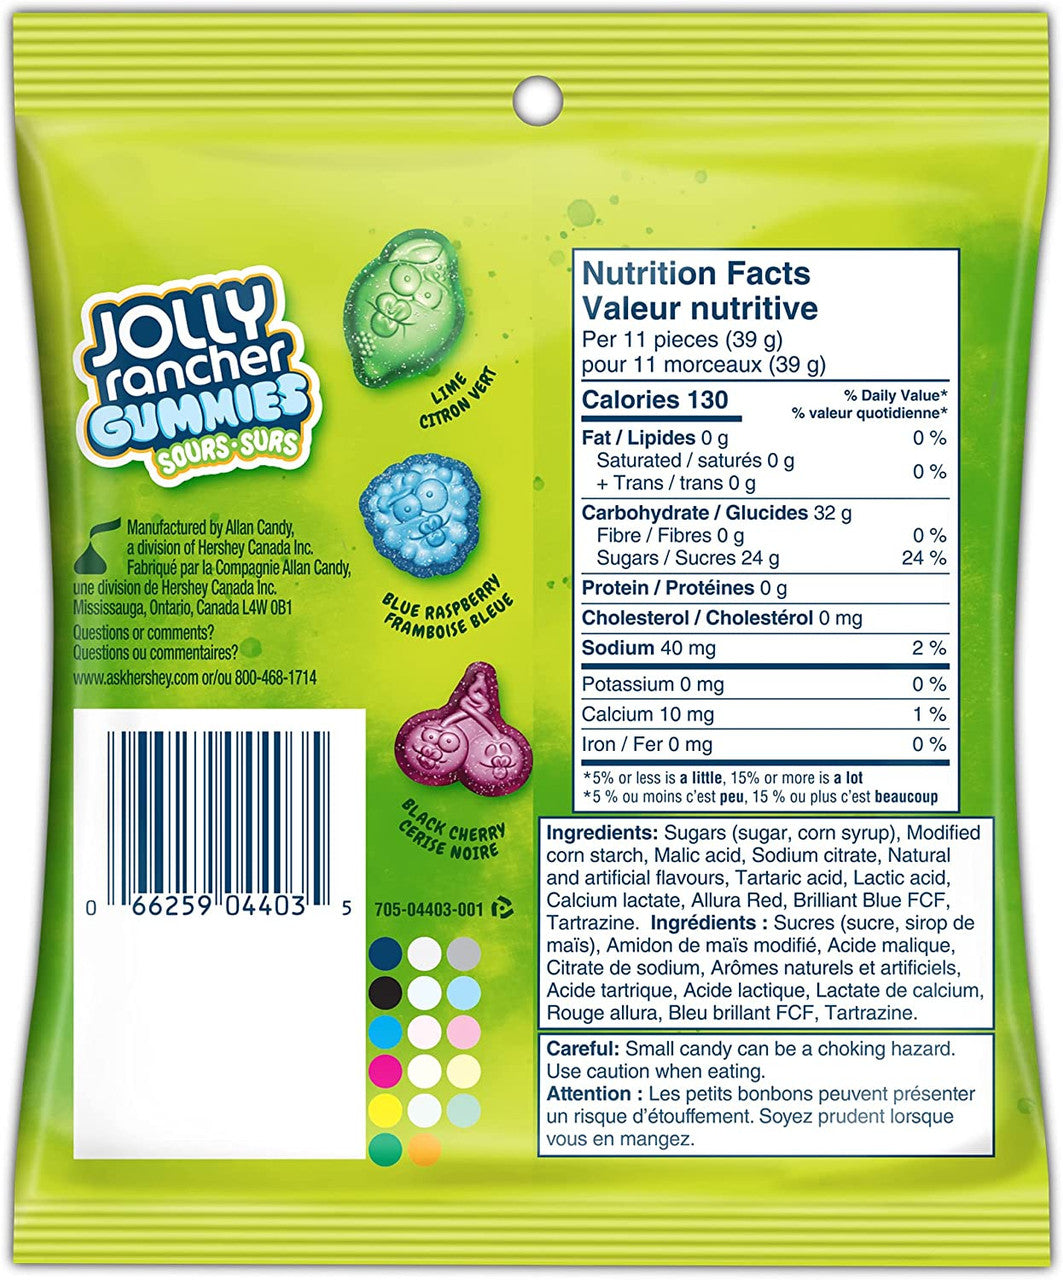 Jolly Rancher Gummies Sours, Original Flavors, 182g/6.4 oz. {Imported from Canada}